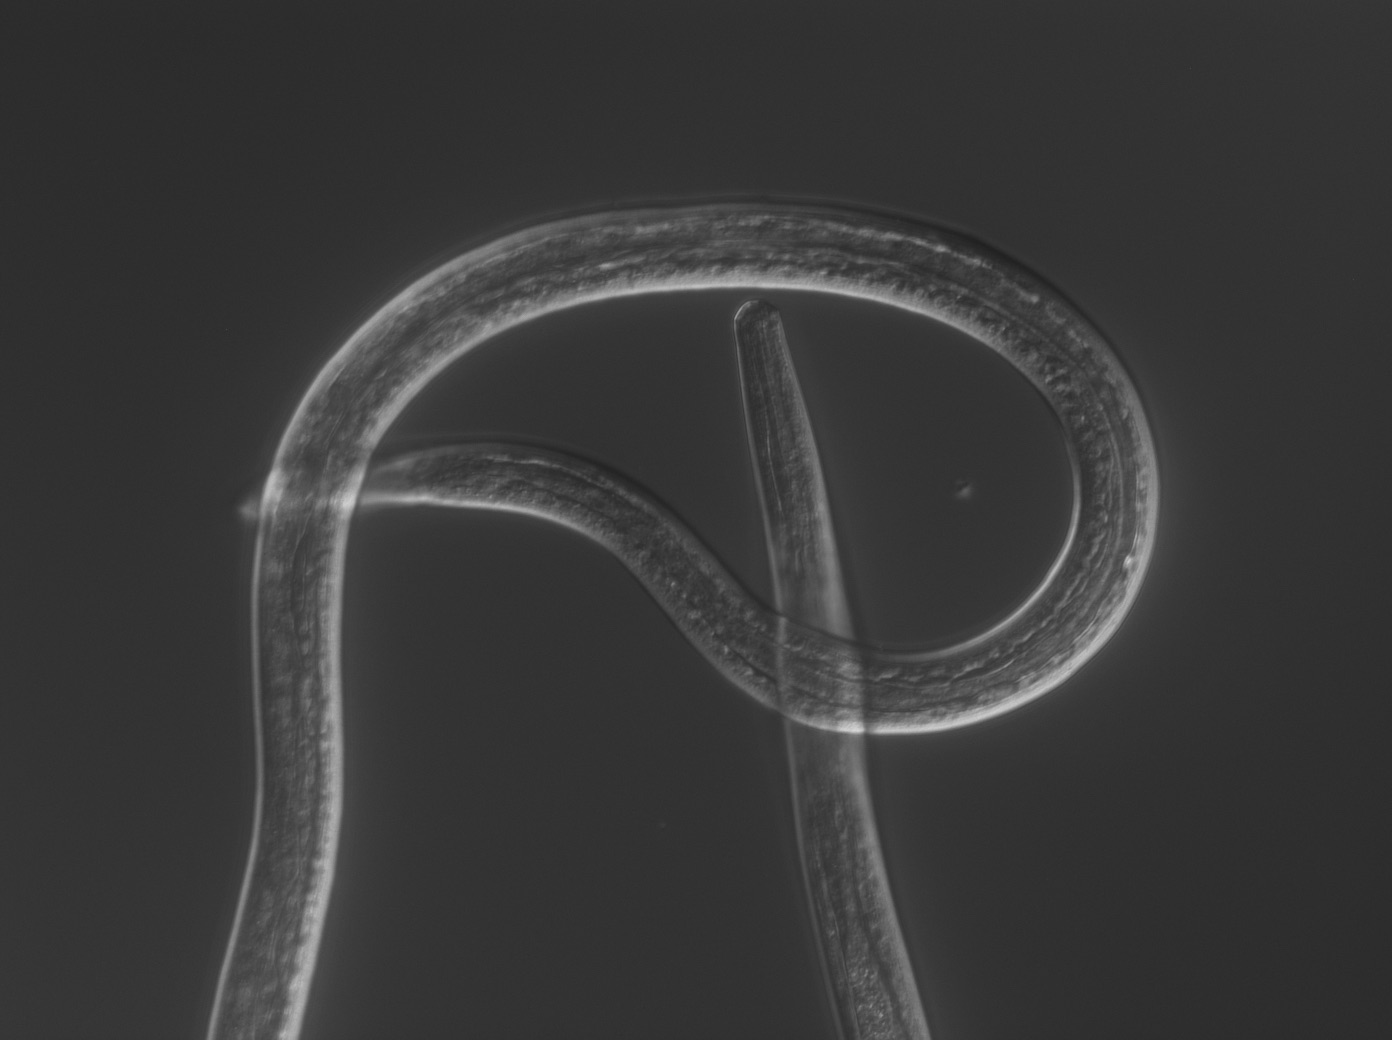 Parasitic worms use their keen senses to wriggle through their hosts